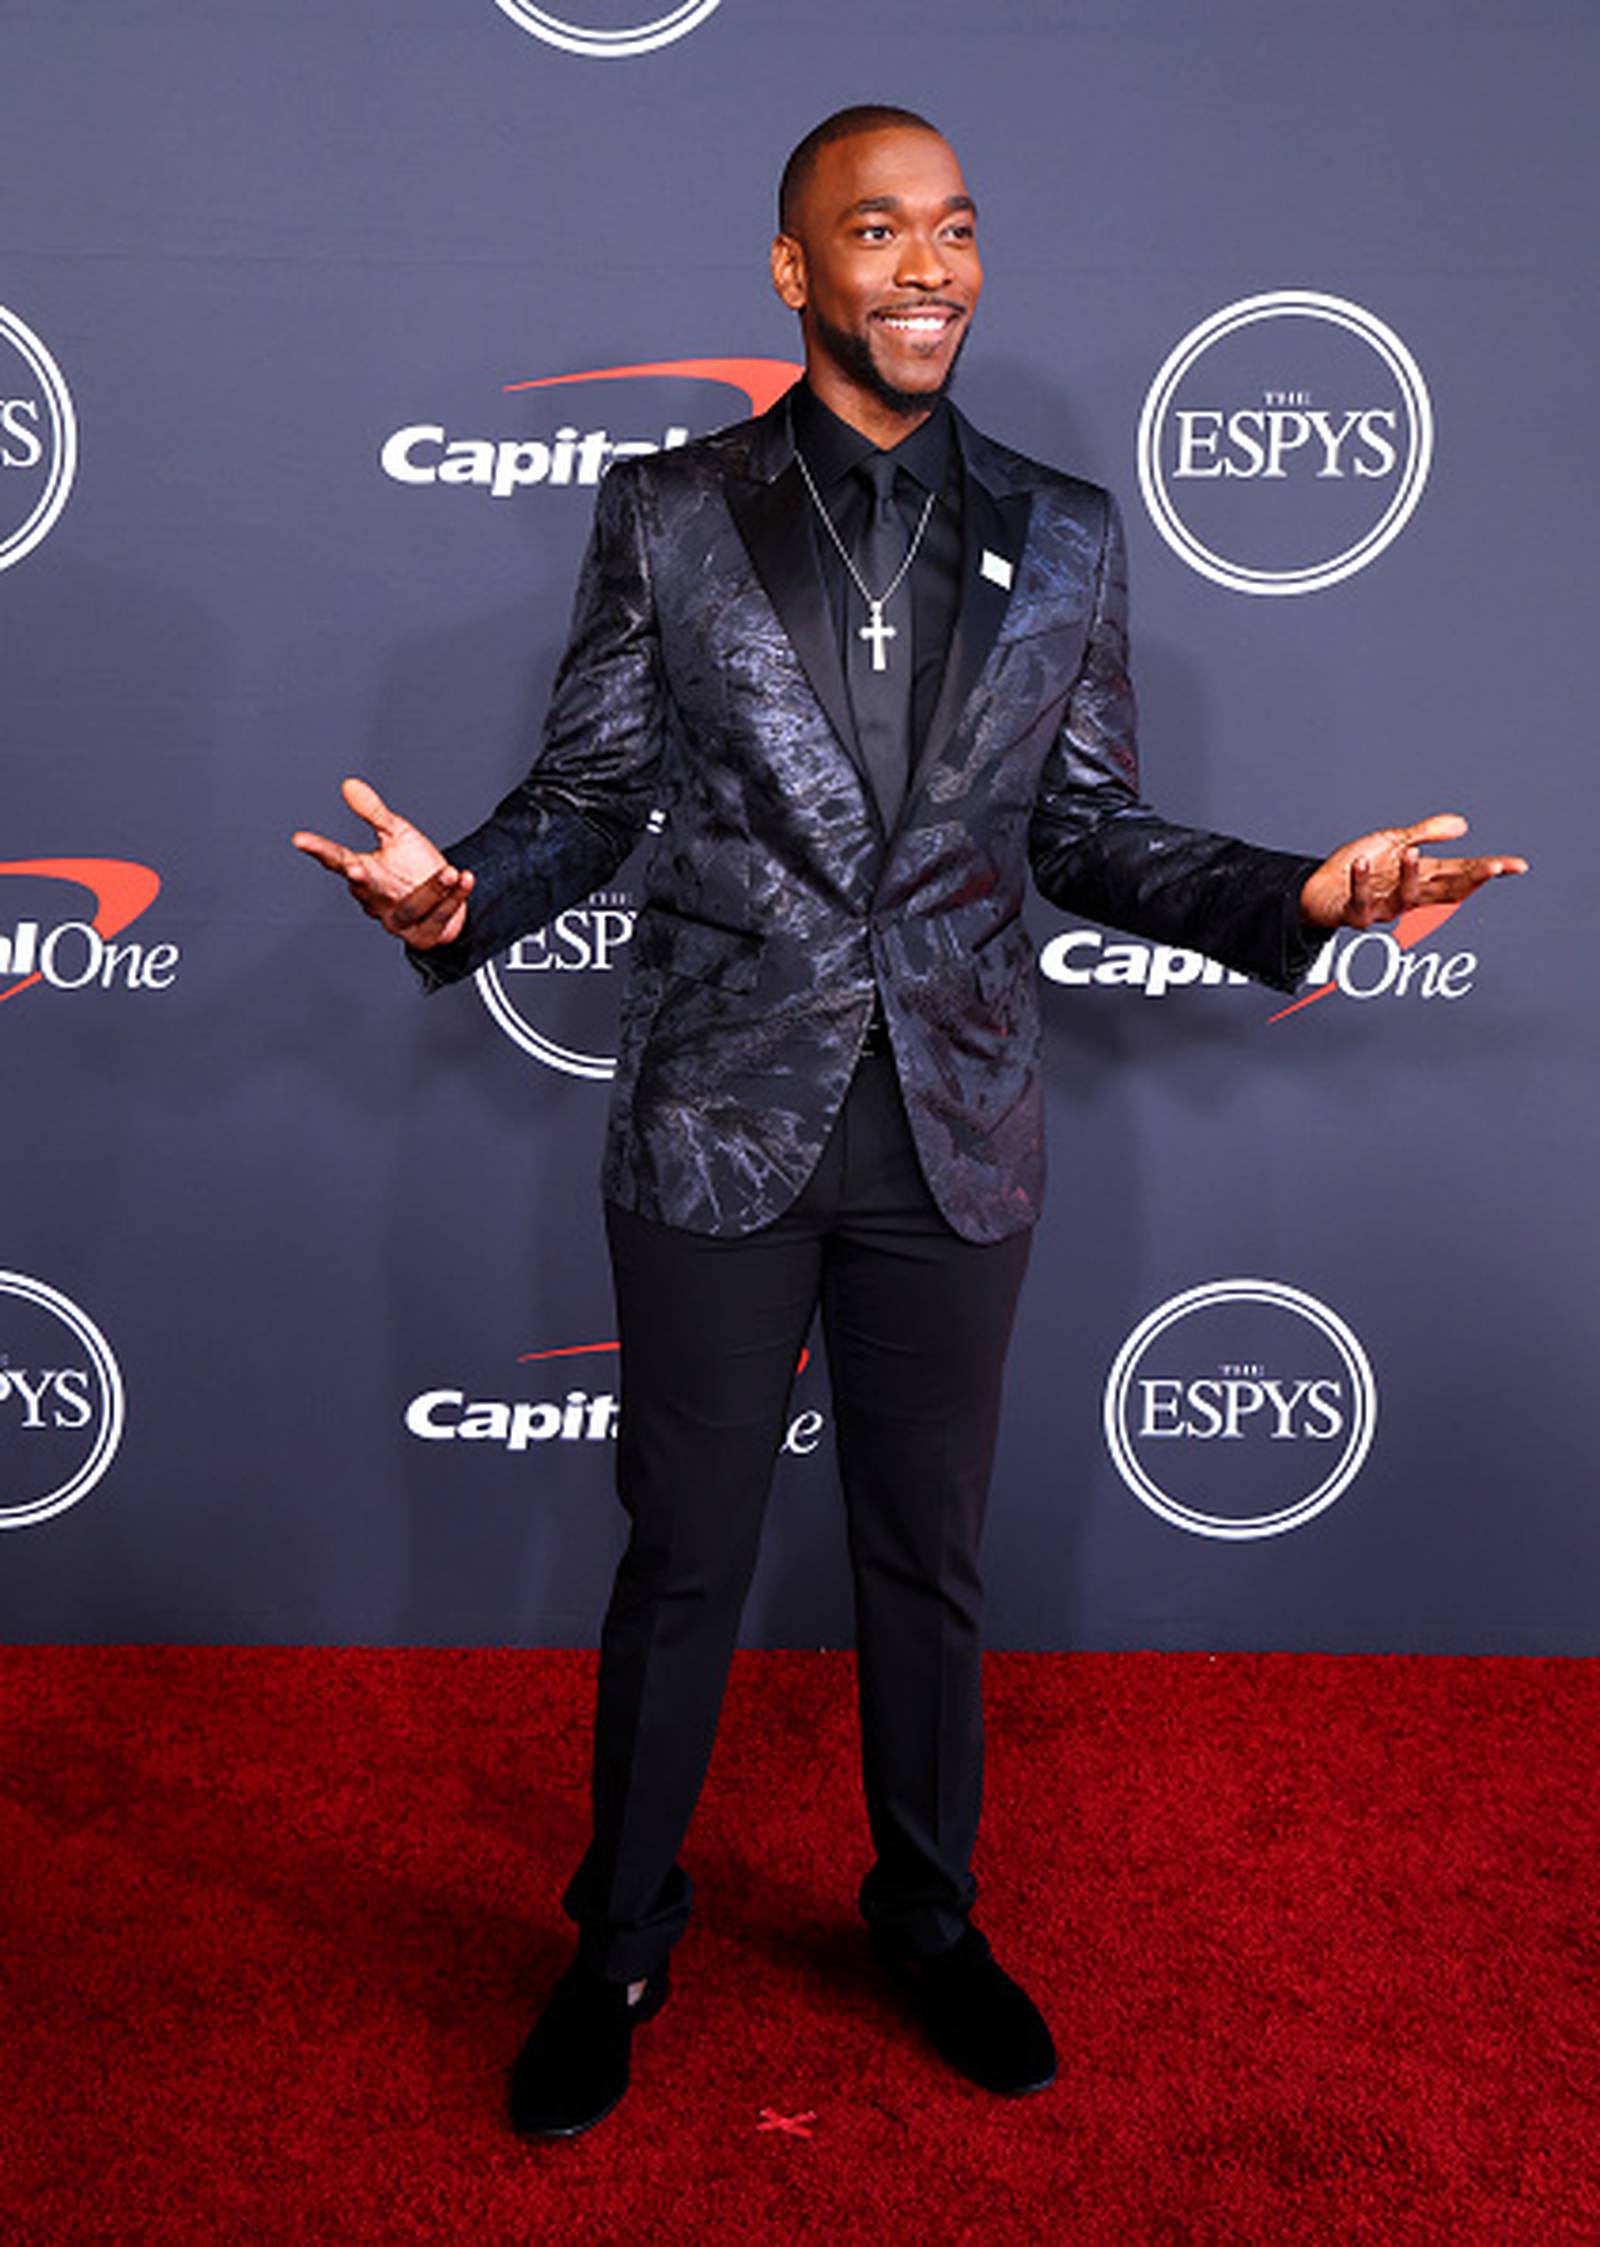 ESPY Awards 2022 See the complete list of winners WSBTV Channel 2